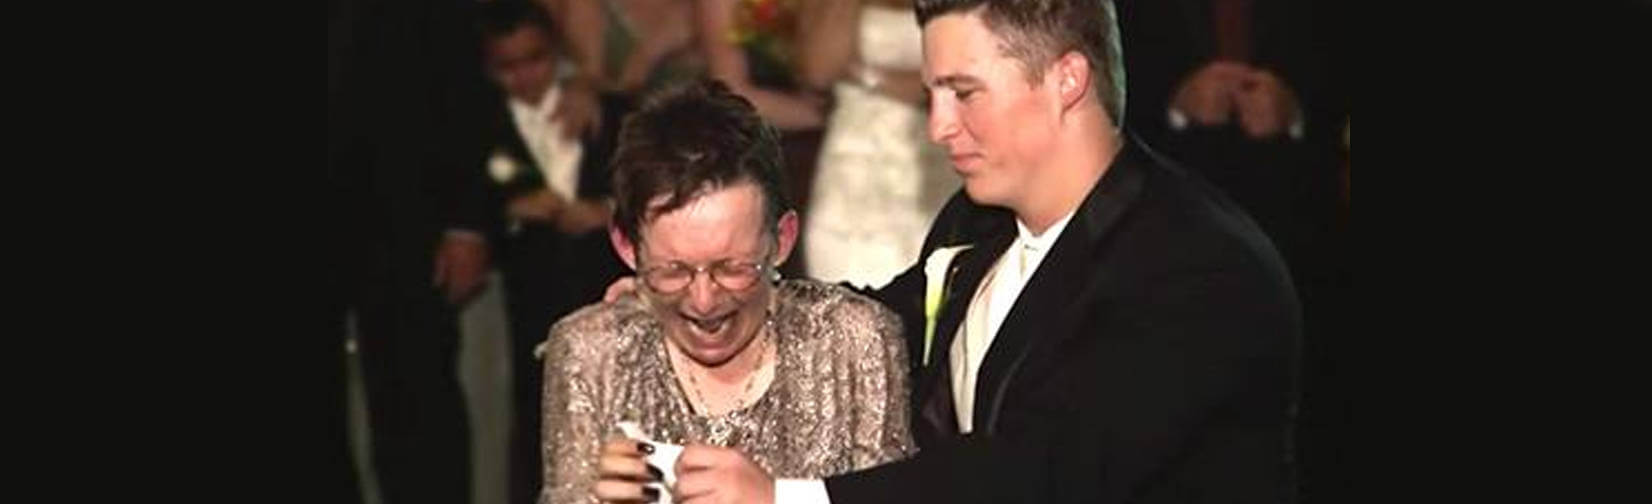 A Son's Last Dance, with his Mum